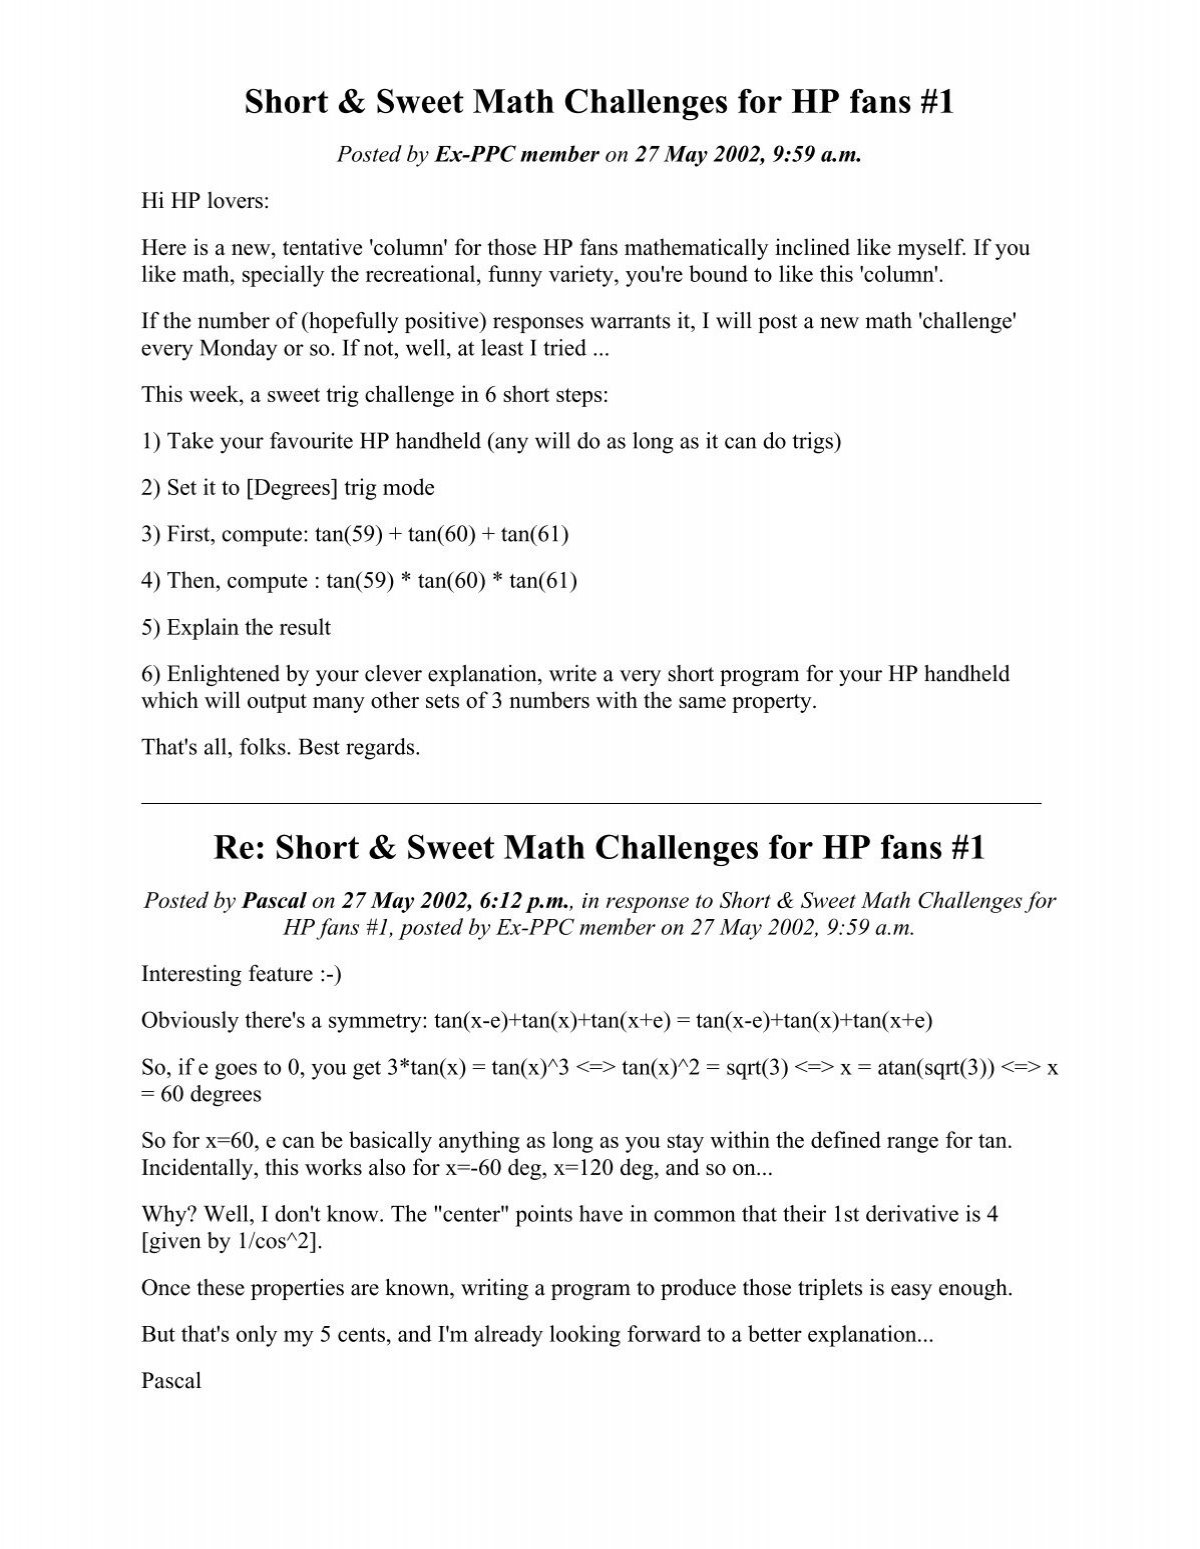 Short & Sweet Math Challenges - The Museum of HP Calculators